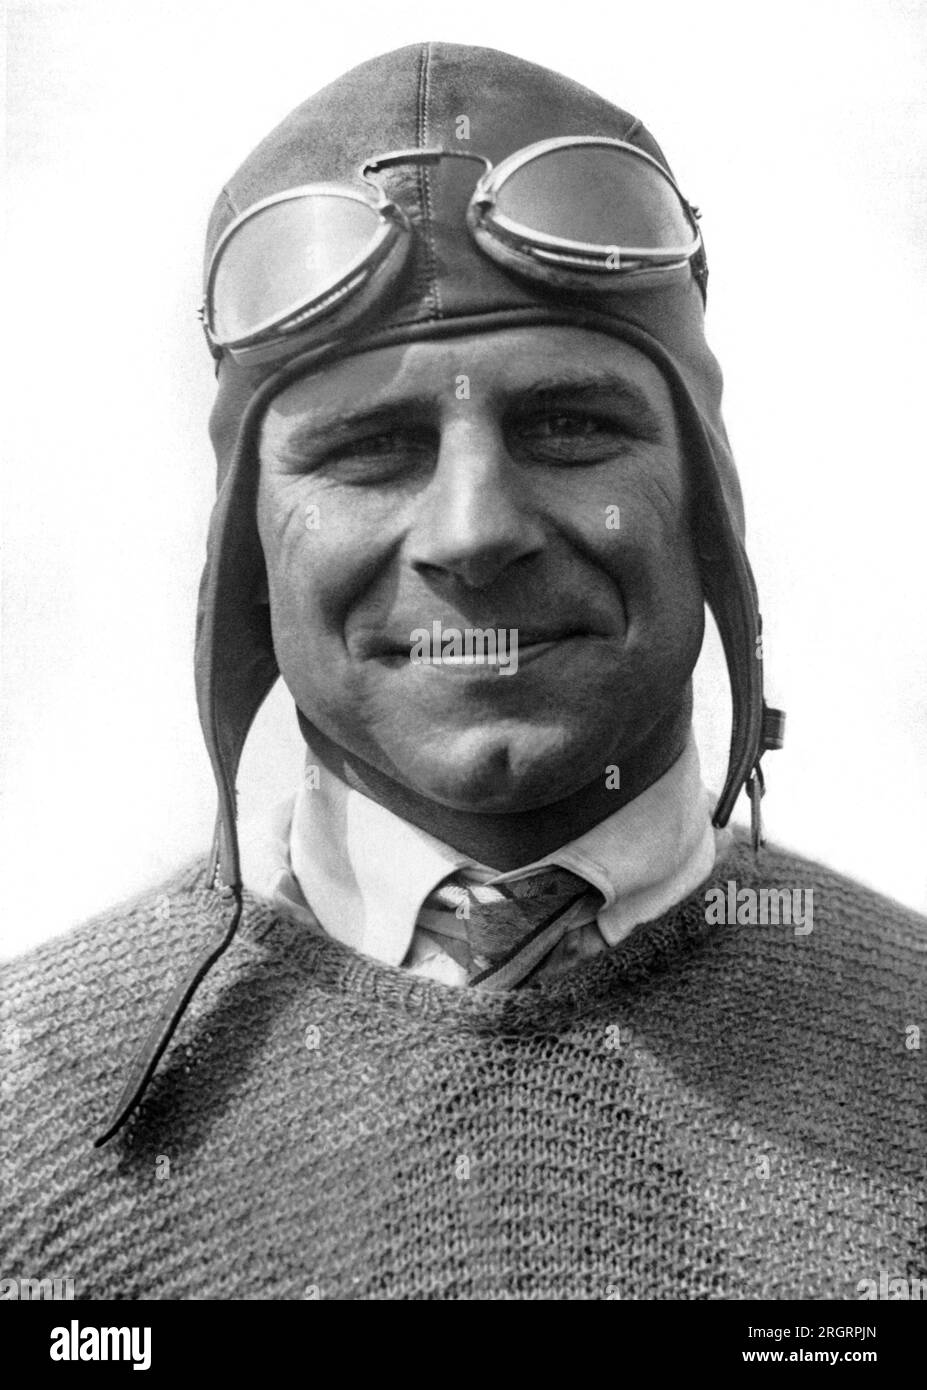 Dayton, Ohio:  October 23, 1925 U.S. Army pilot Lieut. James H. Doolittle of McCook Field in Dayton will race in the Schneider Cup races tomorrow at Baltimore. Stock Photo